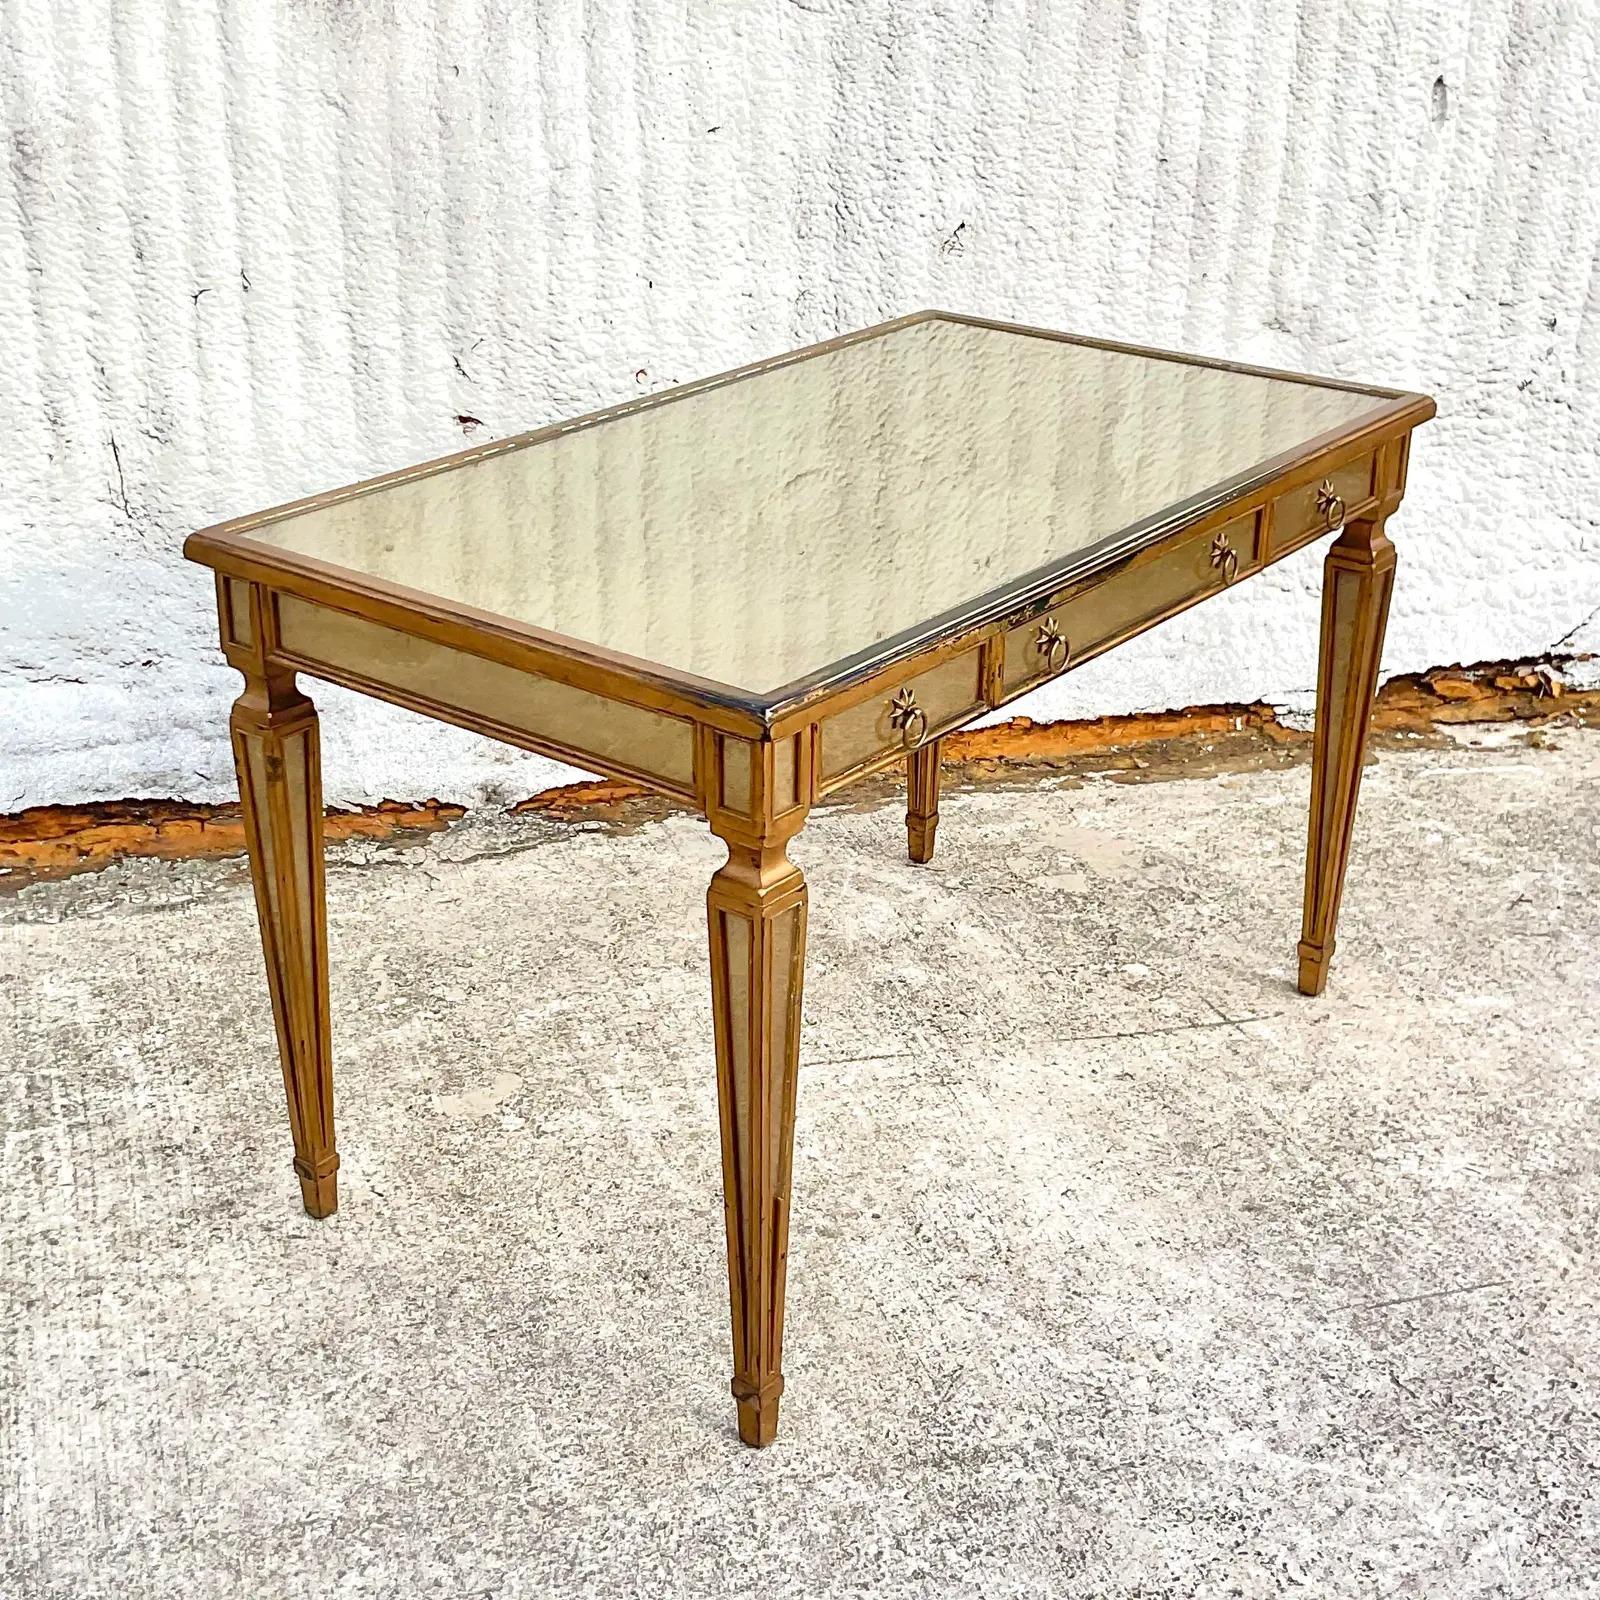 A stunning vintage Regency Writing desk. Made by the iconic Theodore Alexander. A chic Eglomise glass top with a gilt and silvered frame. Signed on the drawer interior. Acquired from a Palm Beach estate.